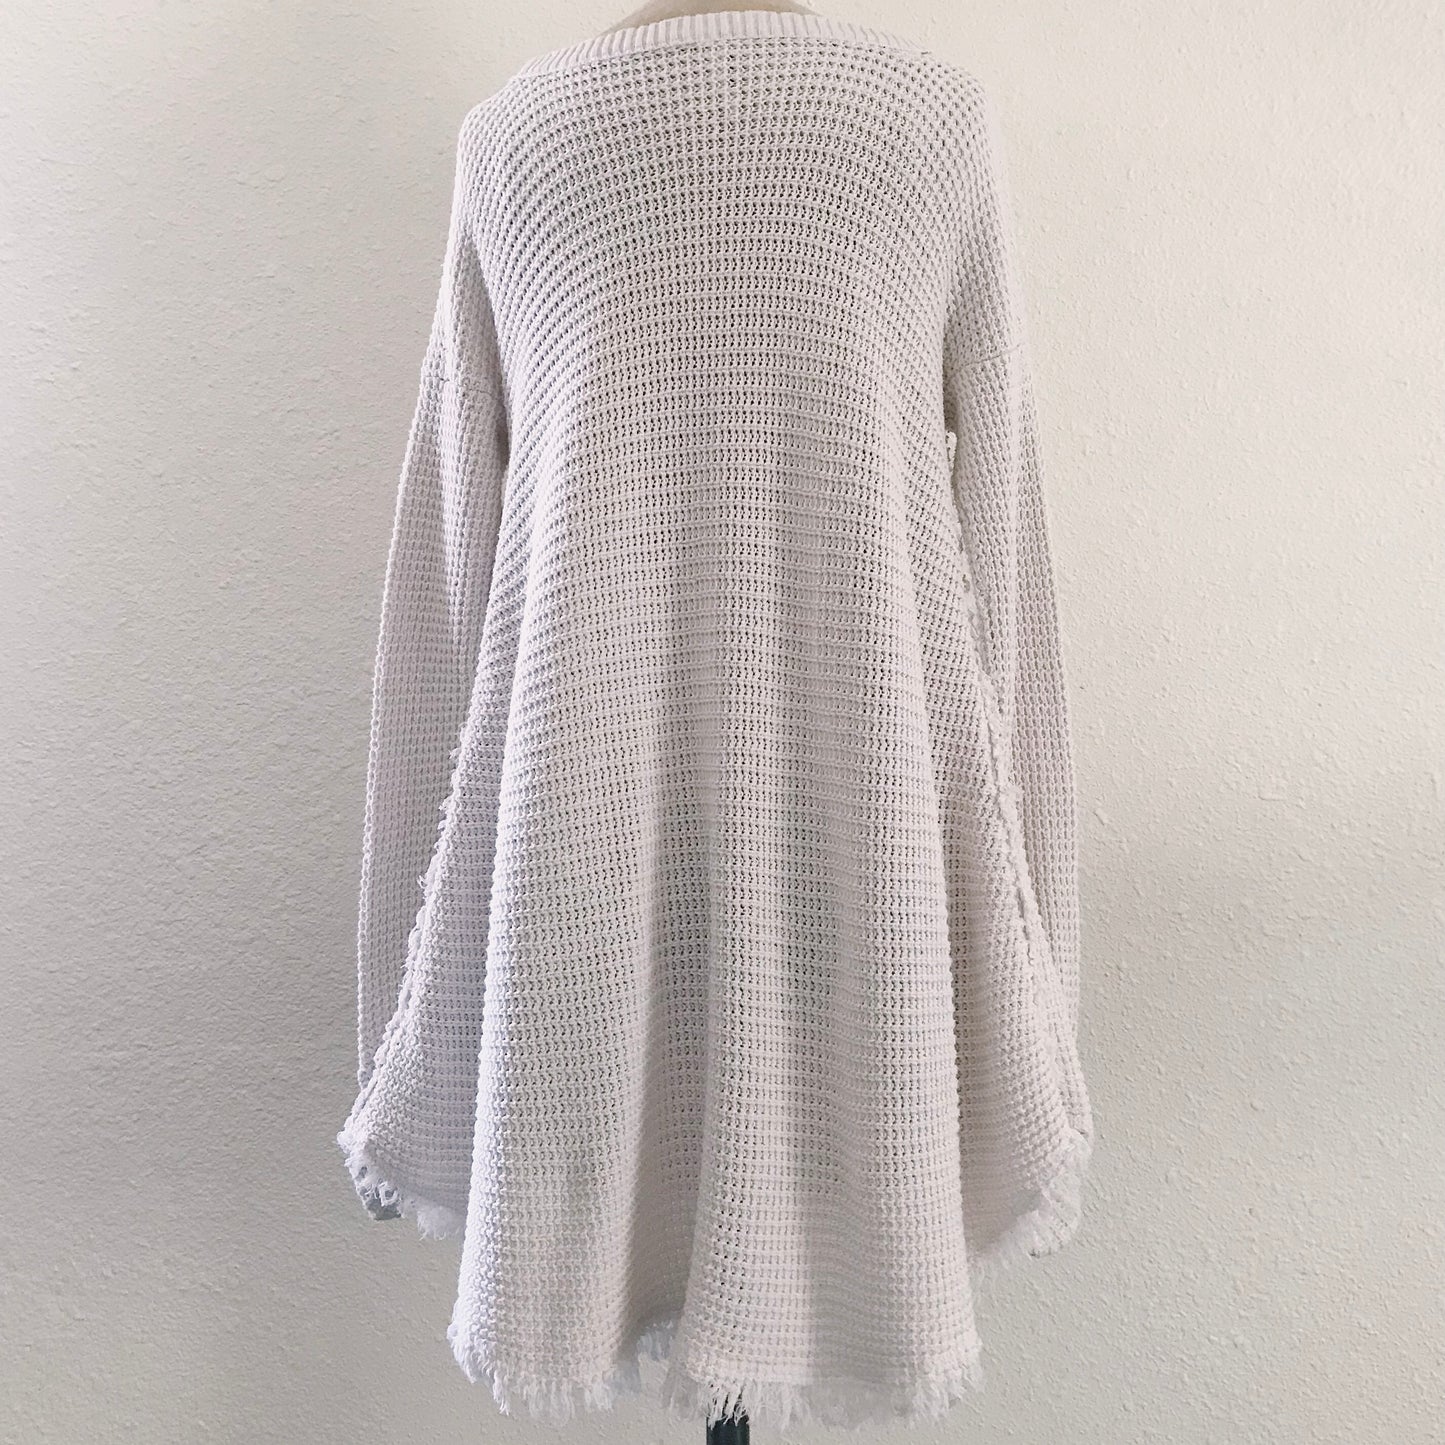 Free People Ivory Waffle Knit Cotton V Neck Top